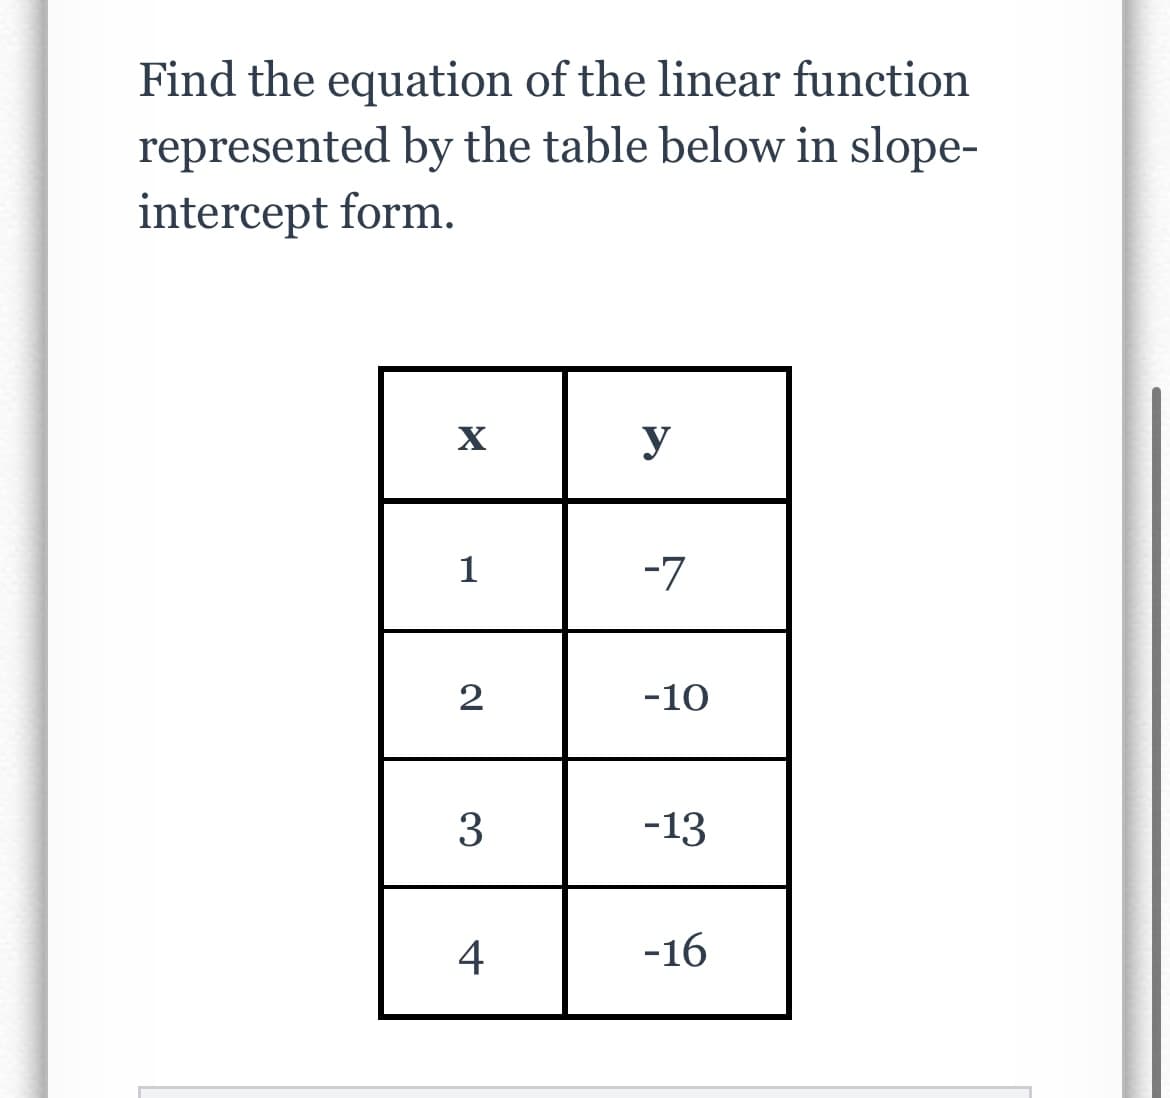 Find the equation of the linear function
represented by the table below in slope-
intercept form.
X
1
2
3
4
y
-7
-10
-13
-16